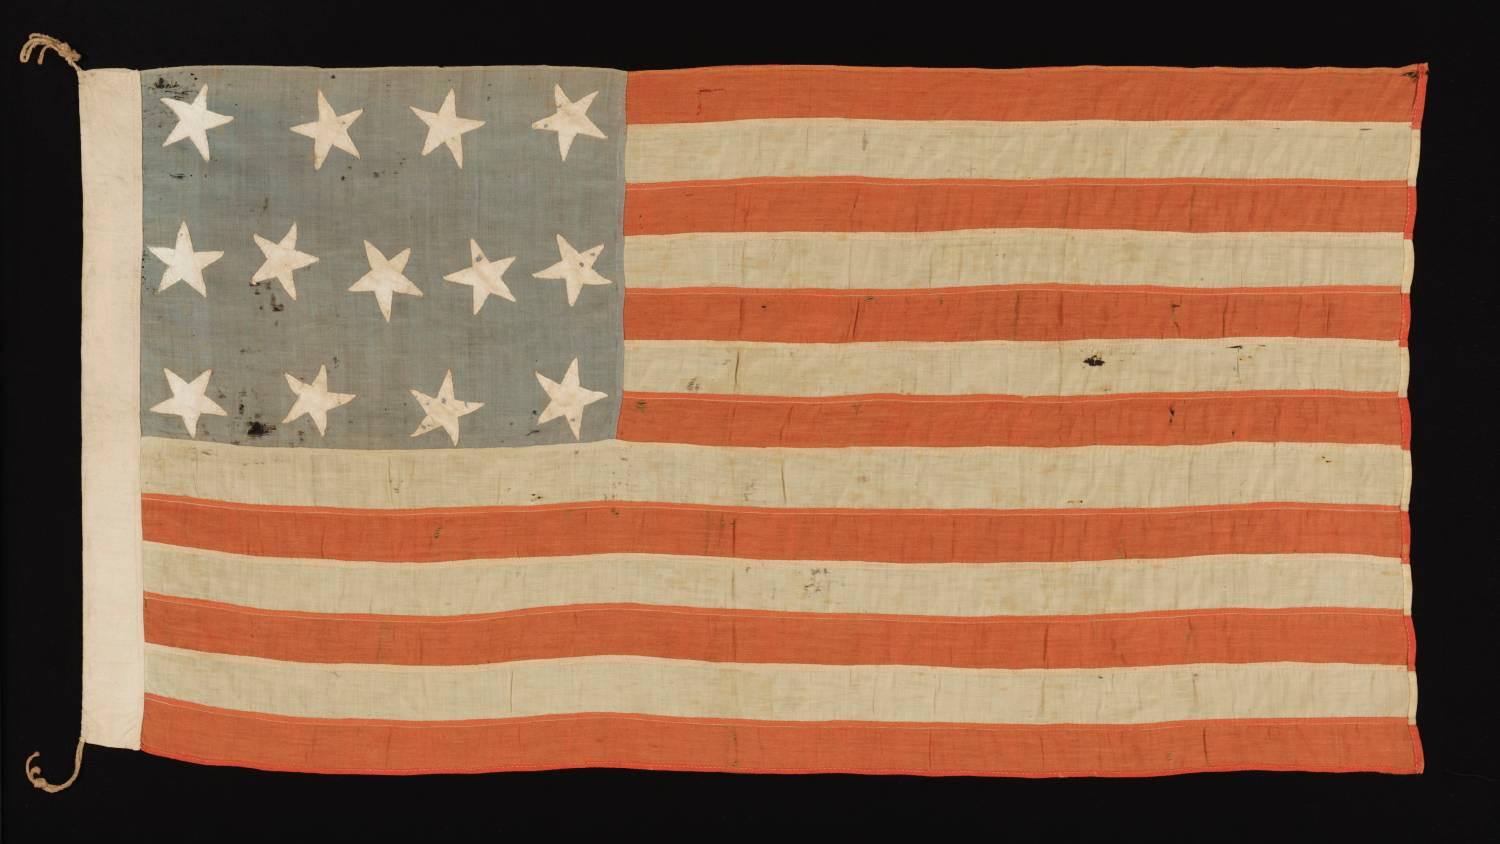 13 STARS IN A 4-5-4 PATTERN, ON AN ANTIQUE AMERICAN FLAG OF THE CIVIL WAR ERA, WITH BEAUTIFUL COLORATION AND IN A TINY SCALE AMONGST ITS PIECED-AND-SEWN COUNTERPARTS:

Made around the time of the American Civil War (1861-65), this American national